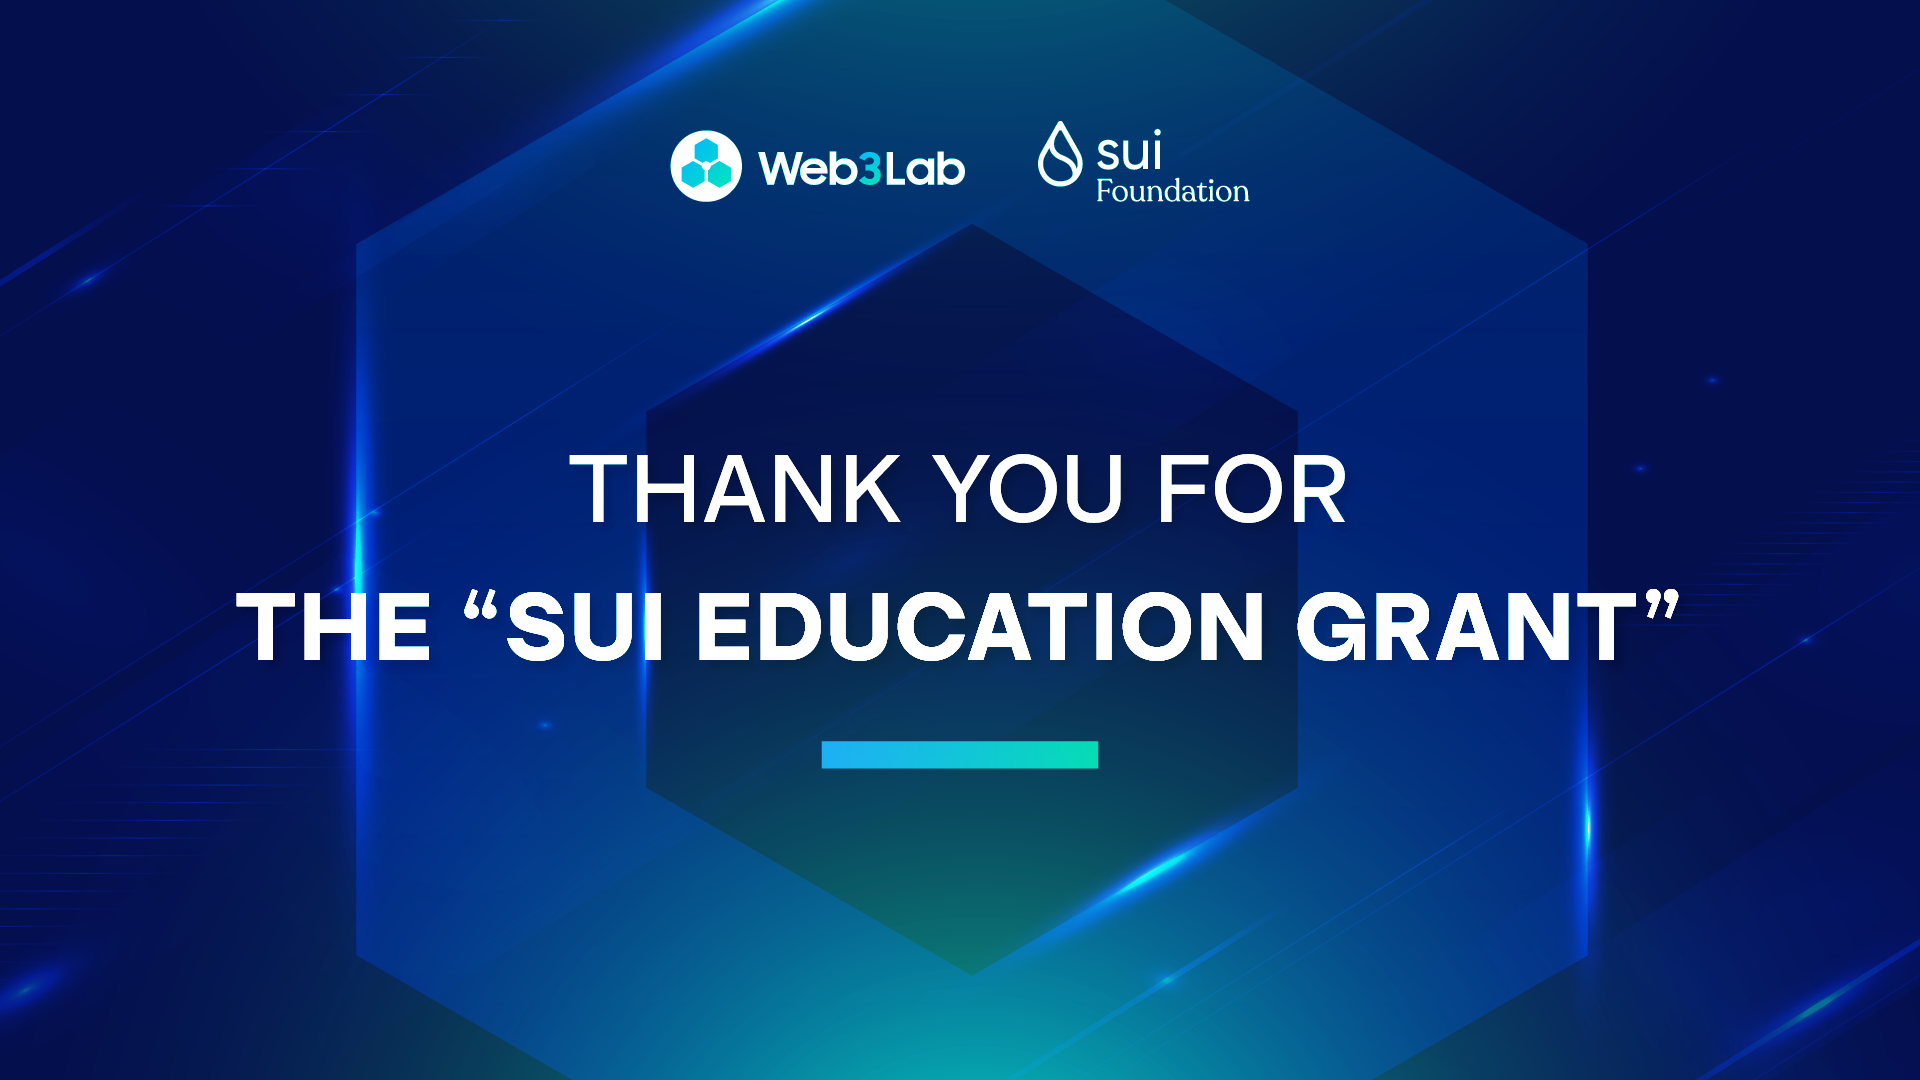 Web3Lab Receives the "Sui Education Grant"